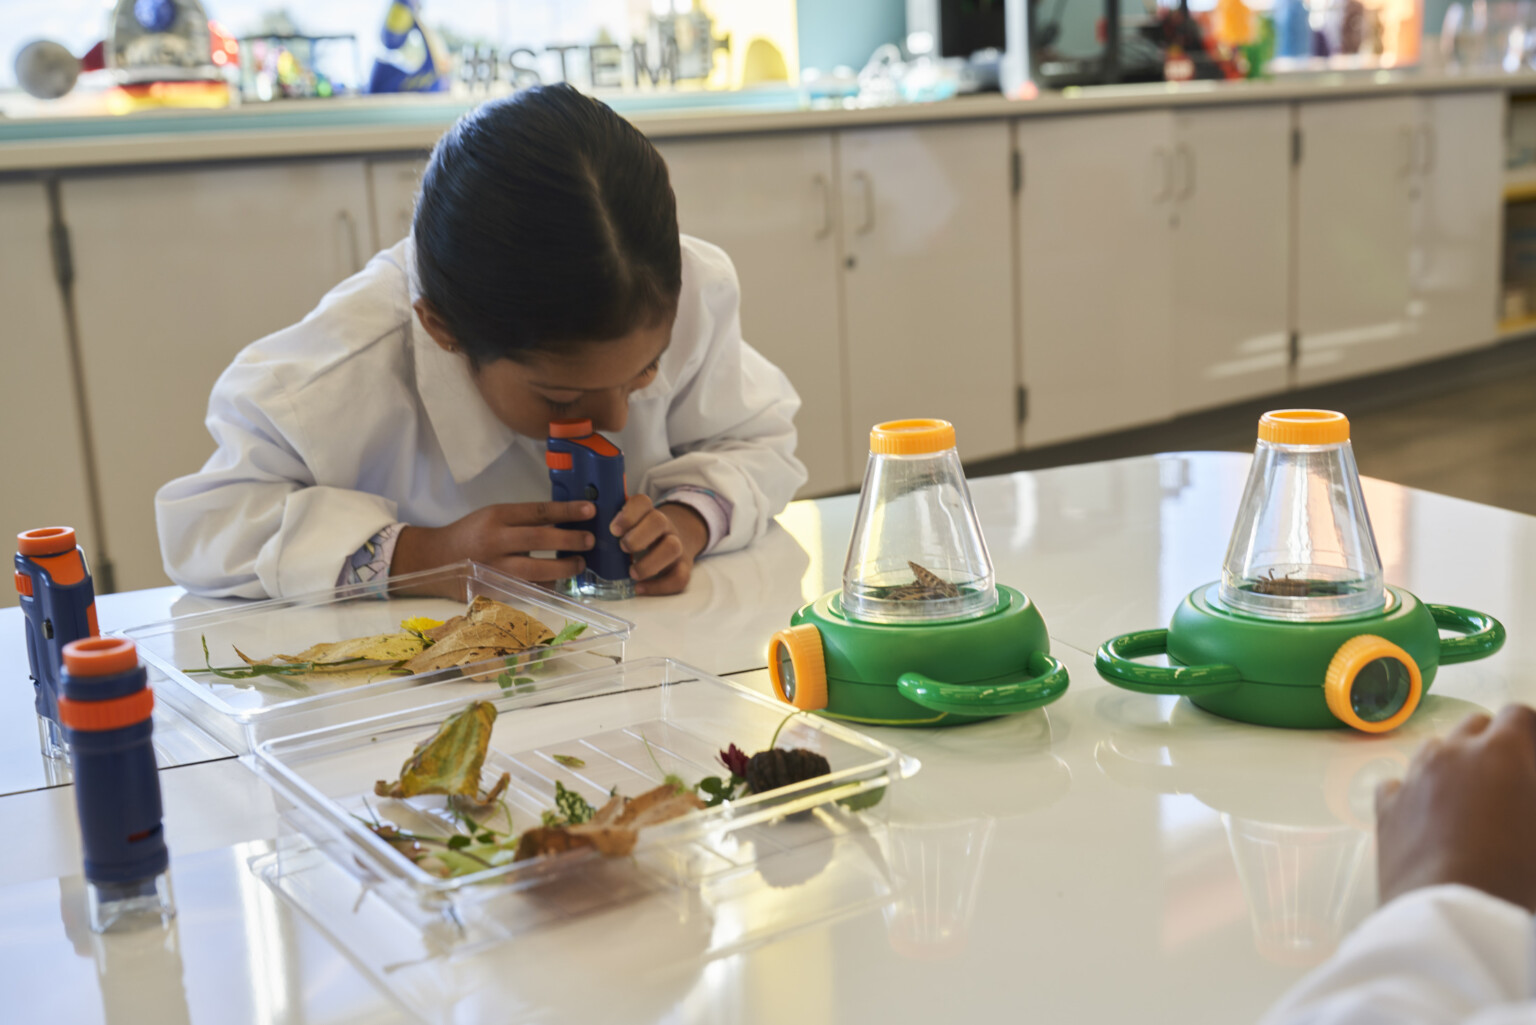 Young girl in lab coat looking in microscope in a science lab.